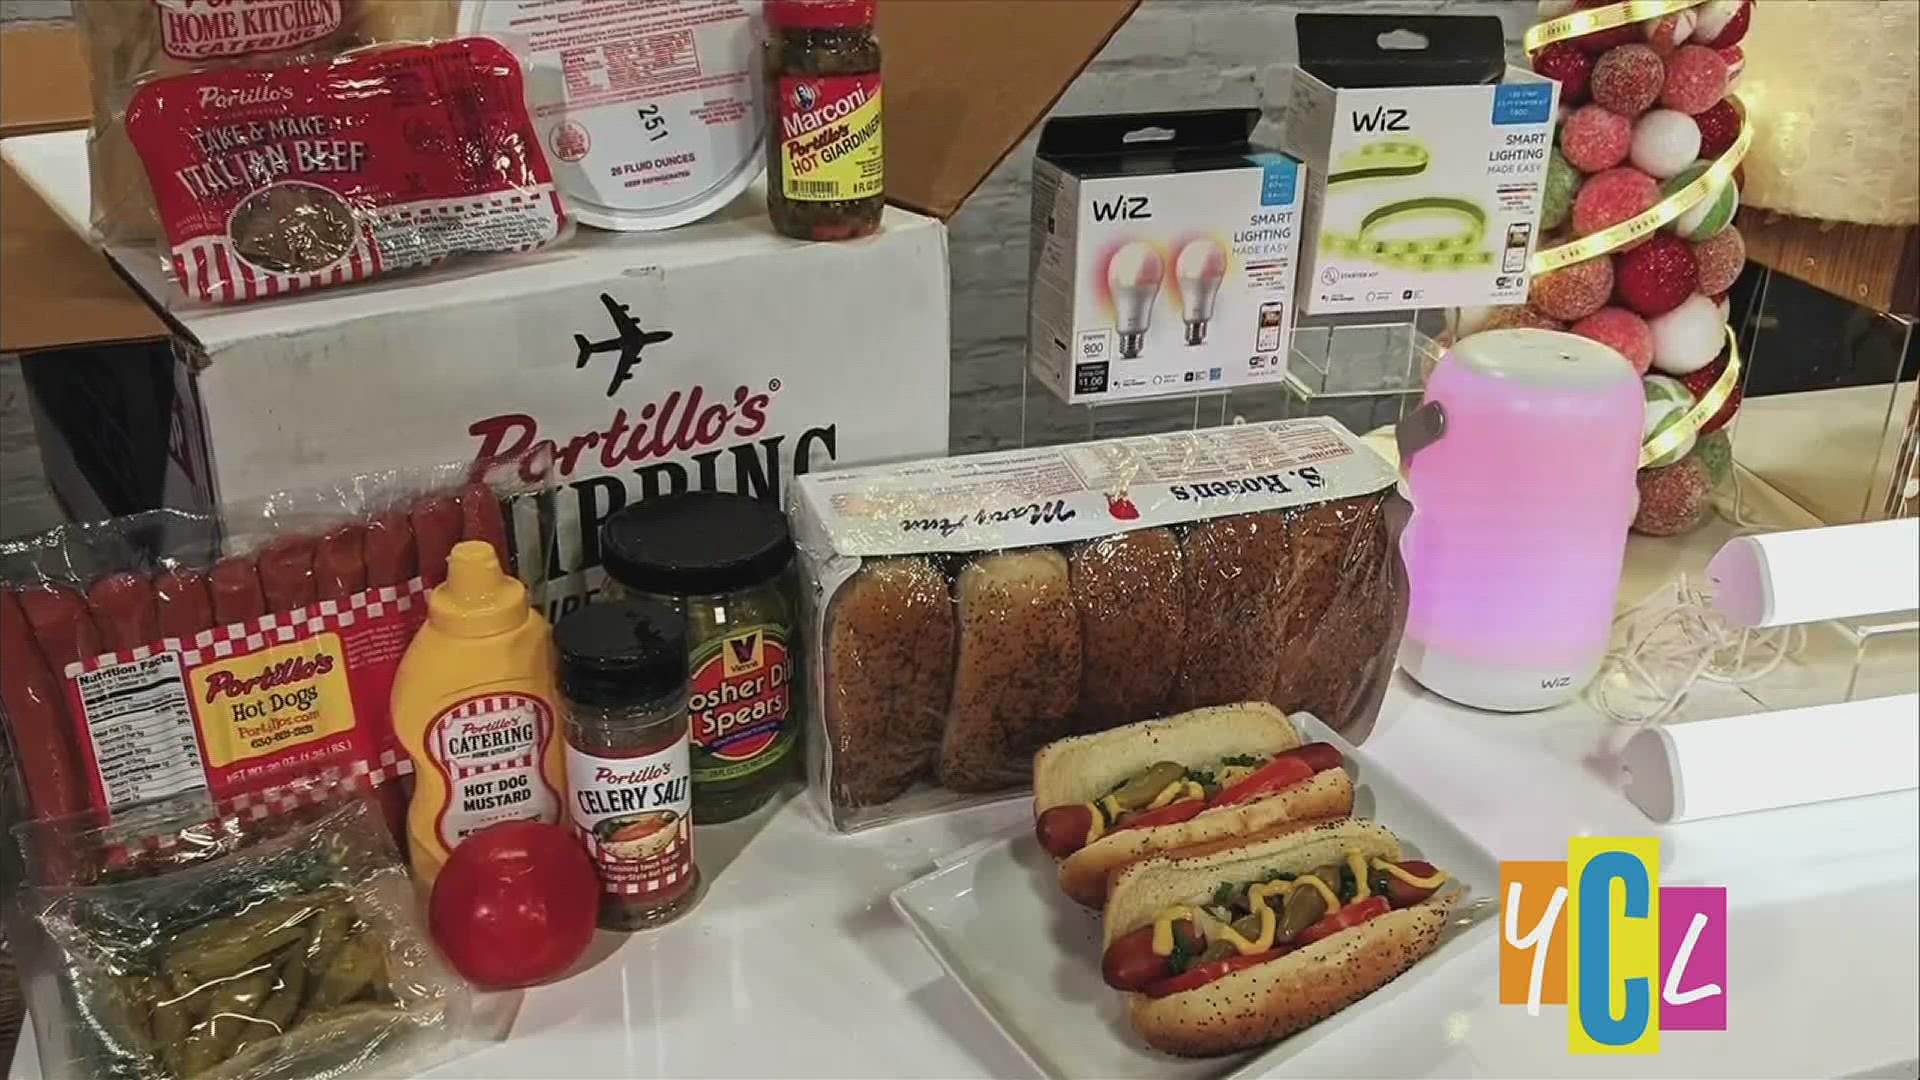 It's a time to give and receive so check out this list to stay on top of the latest must-haves! This segment is paid by Portillo, WiZ Connected, and Staples.